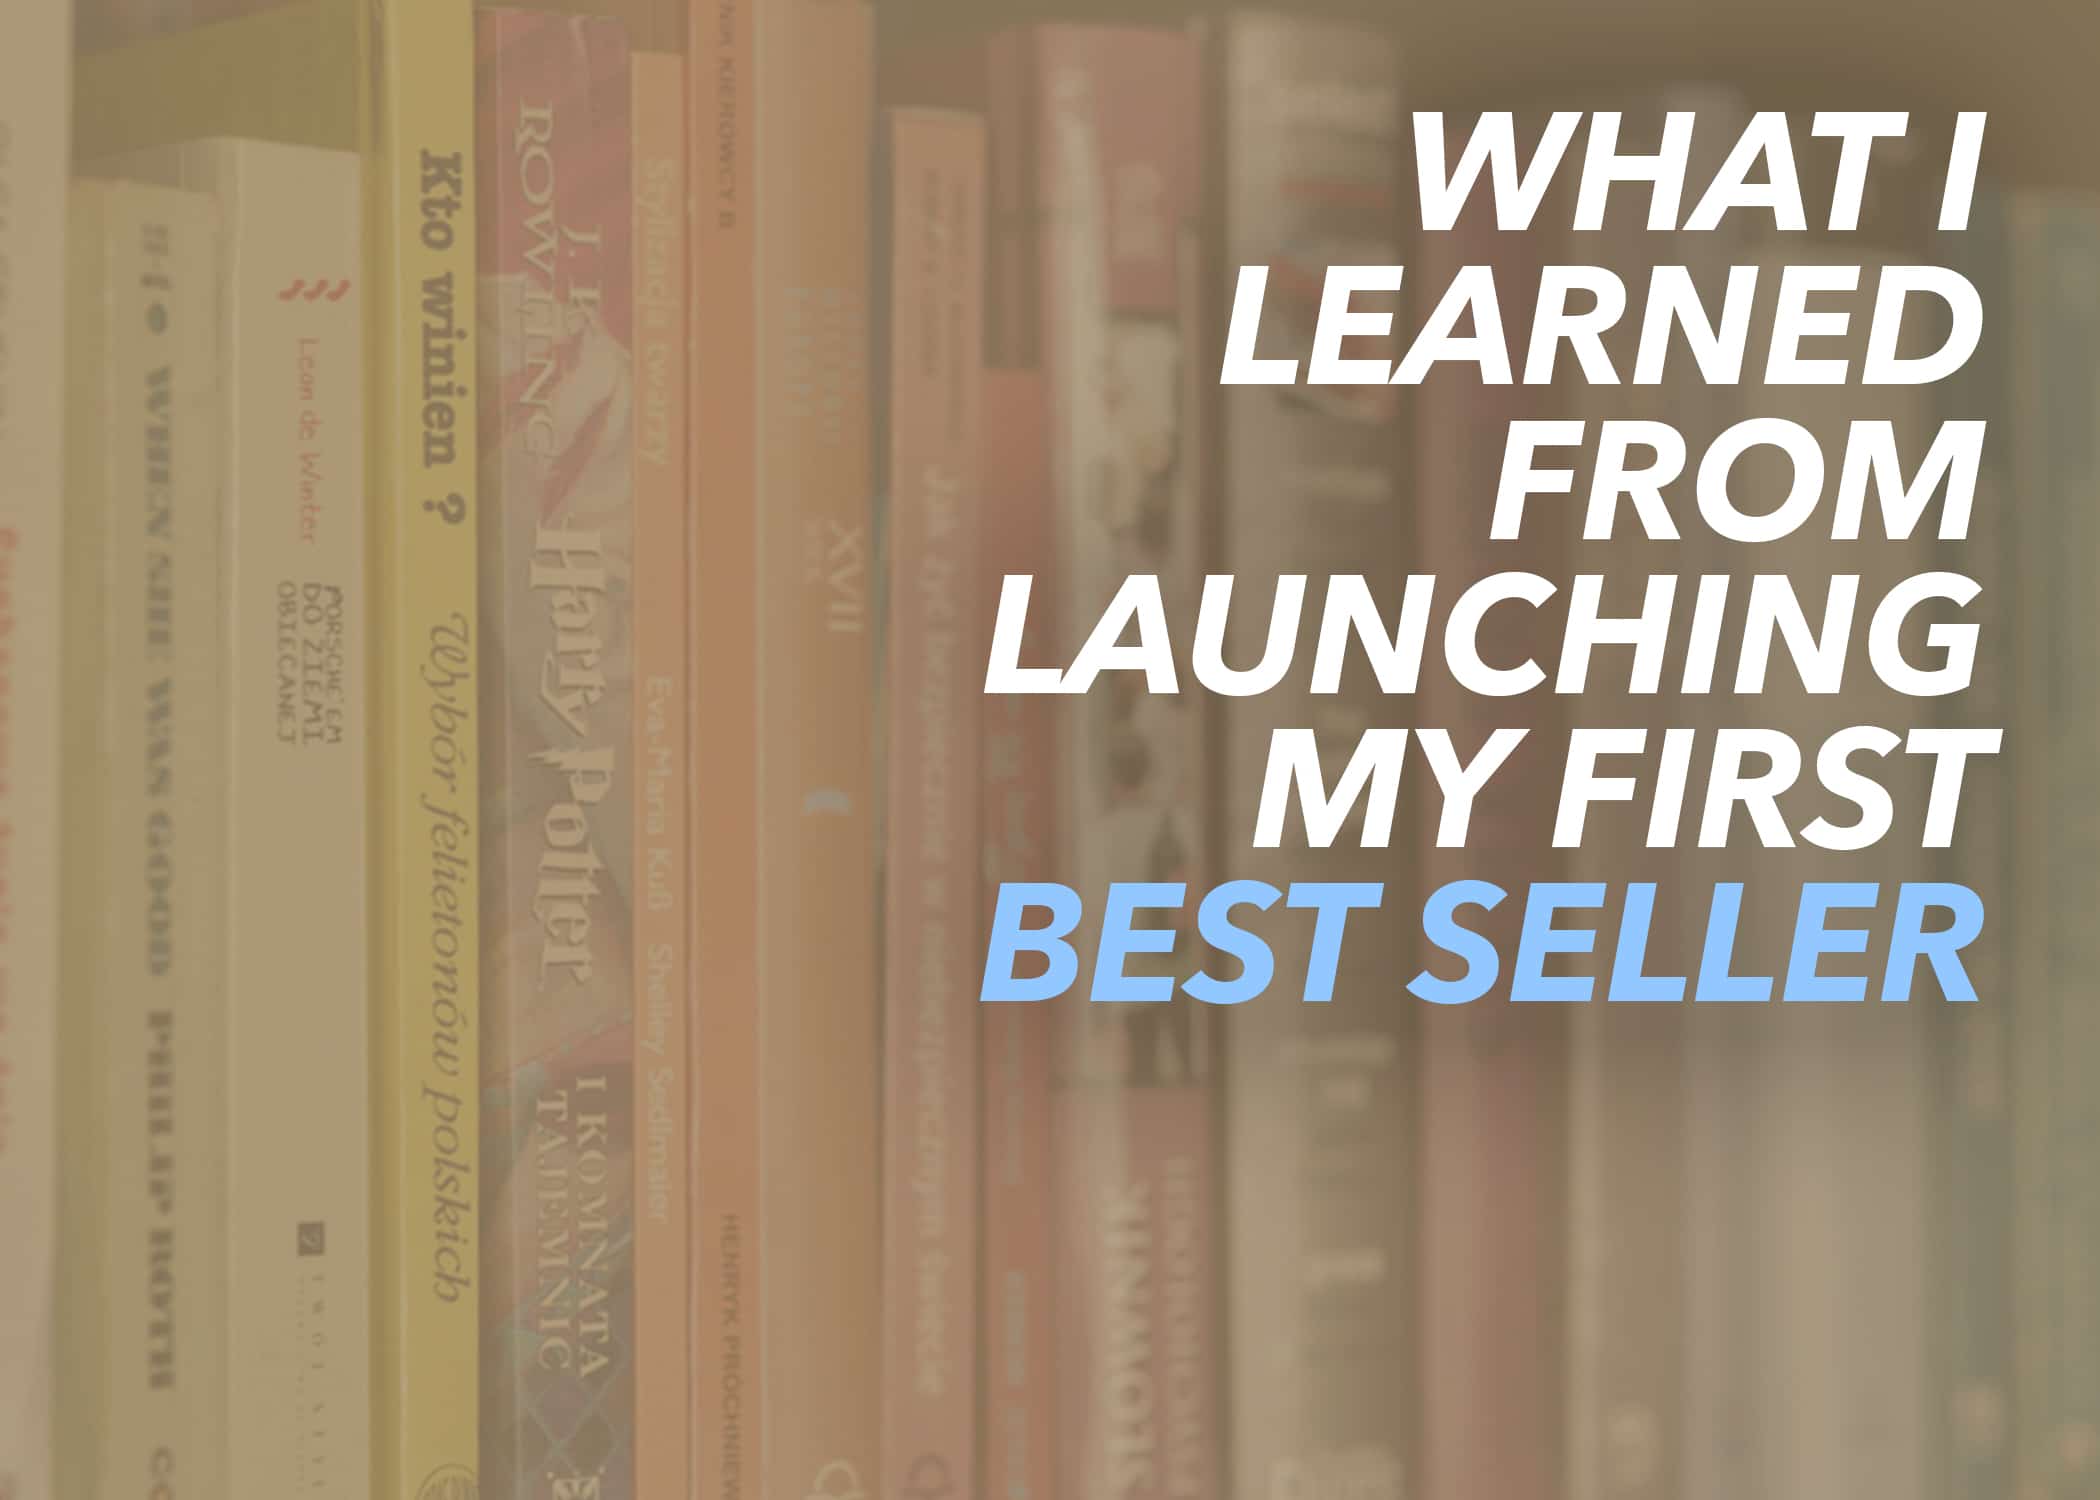 What I Learned from Launching My First Best Seller